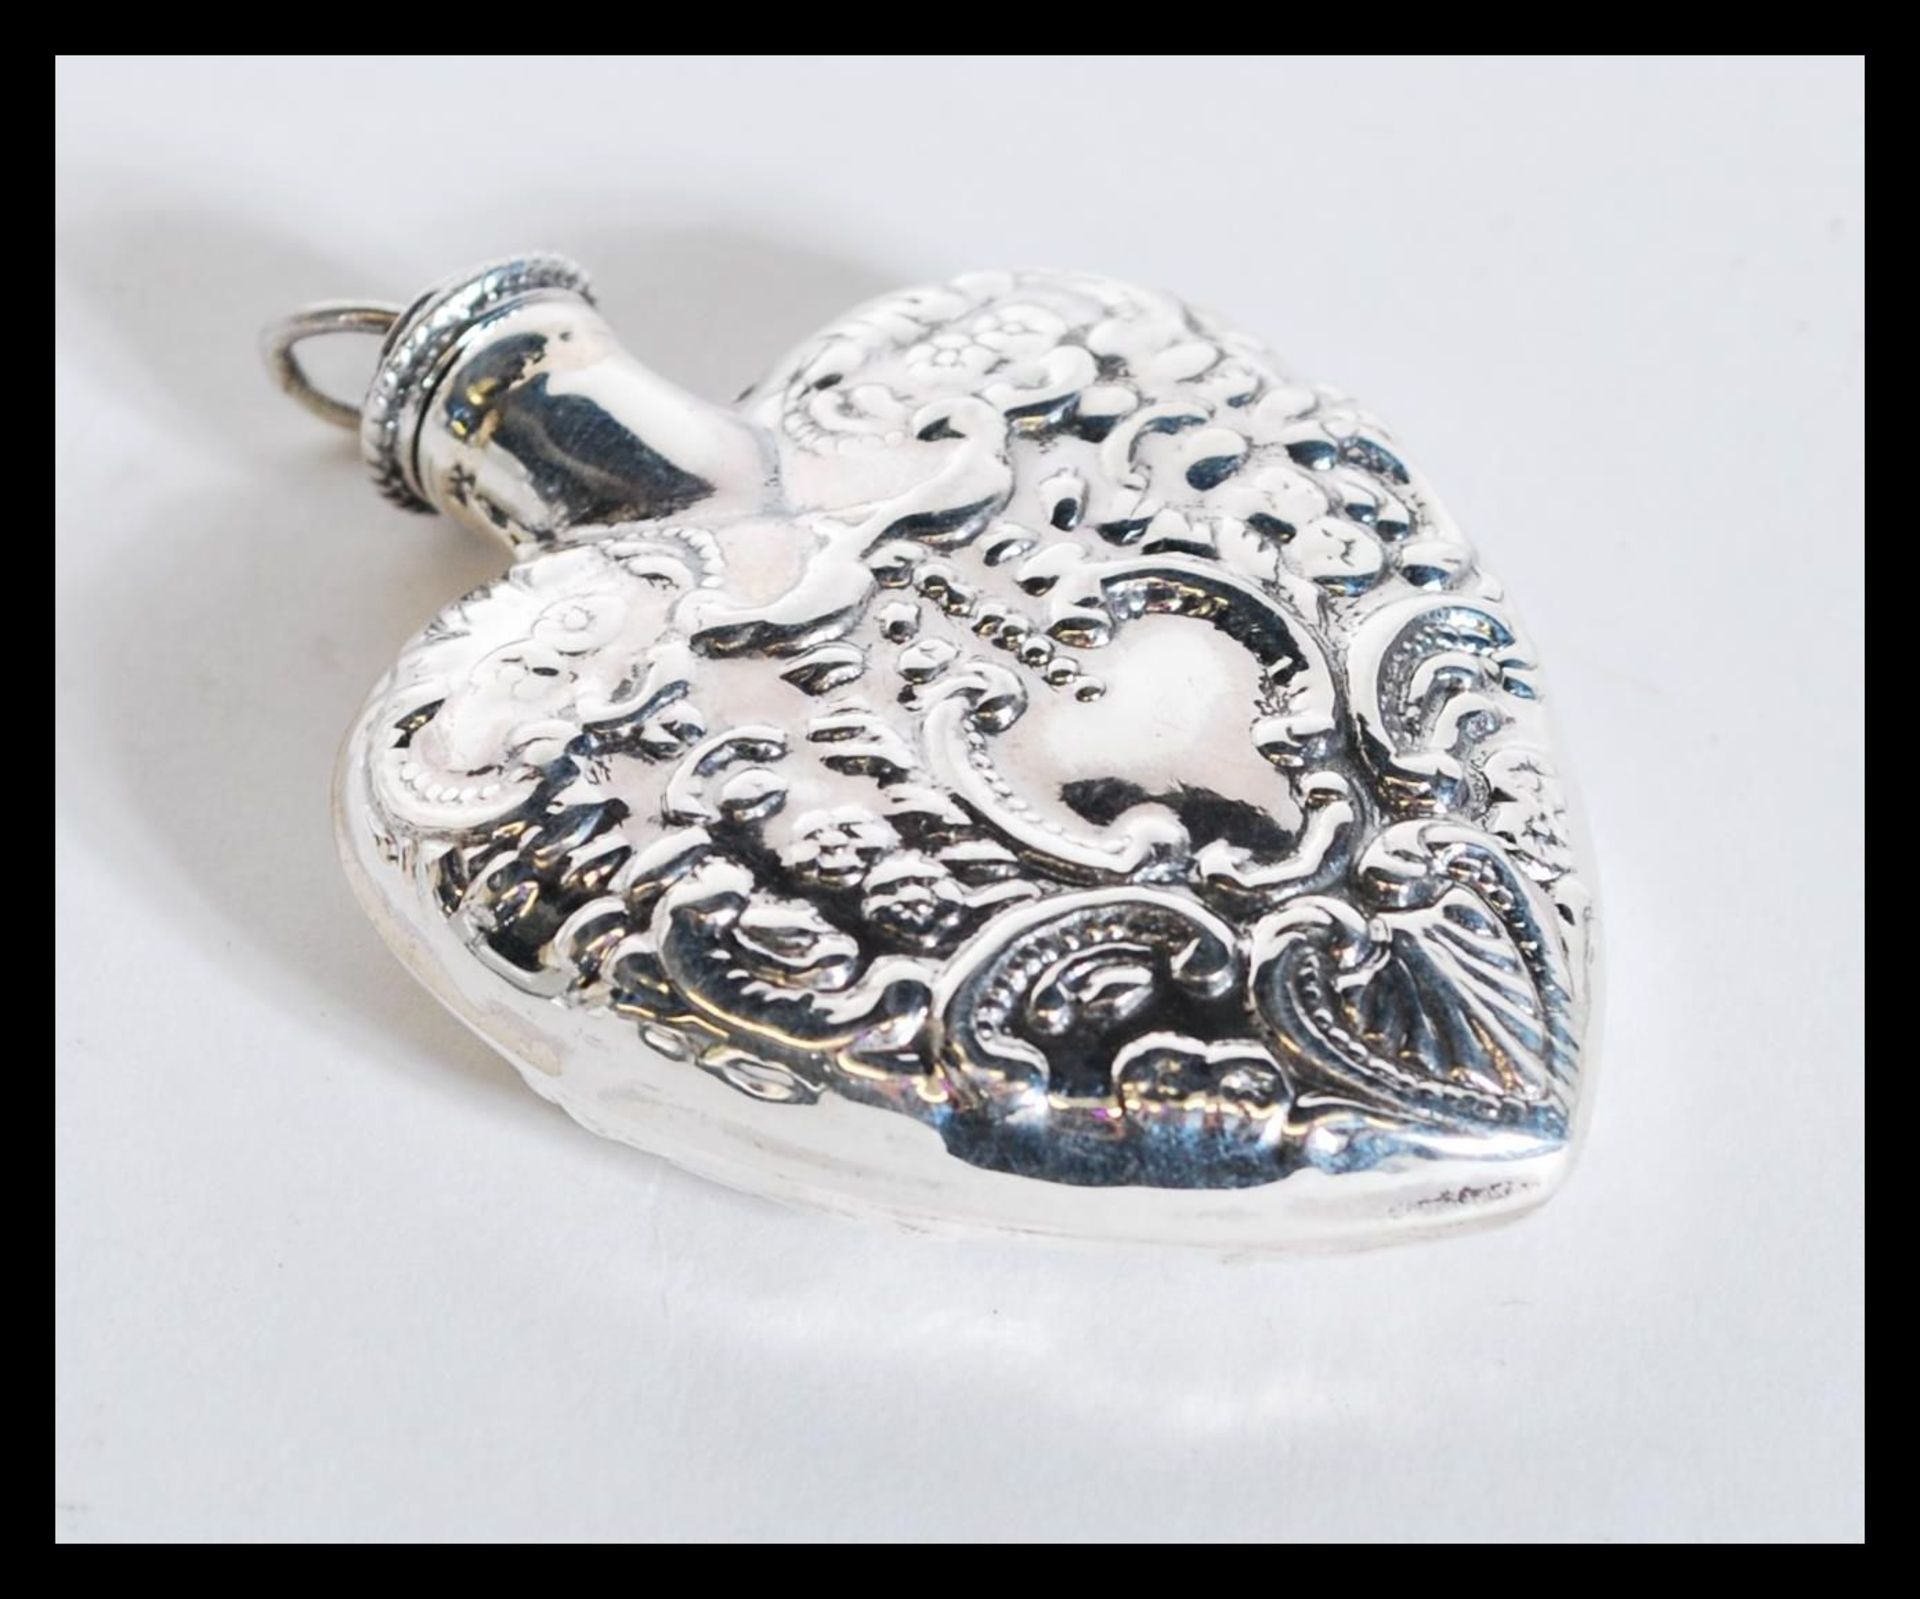 A sterling silver perfume bottle in the form of a heart having scrolled decoration. Weighs 21 grams.